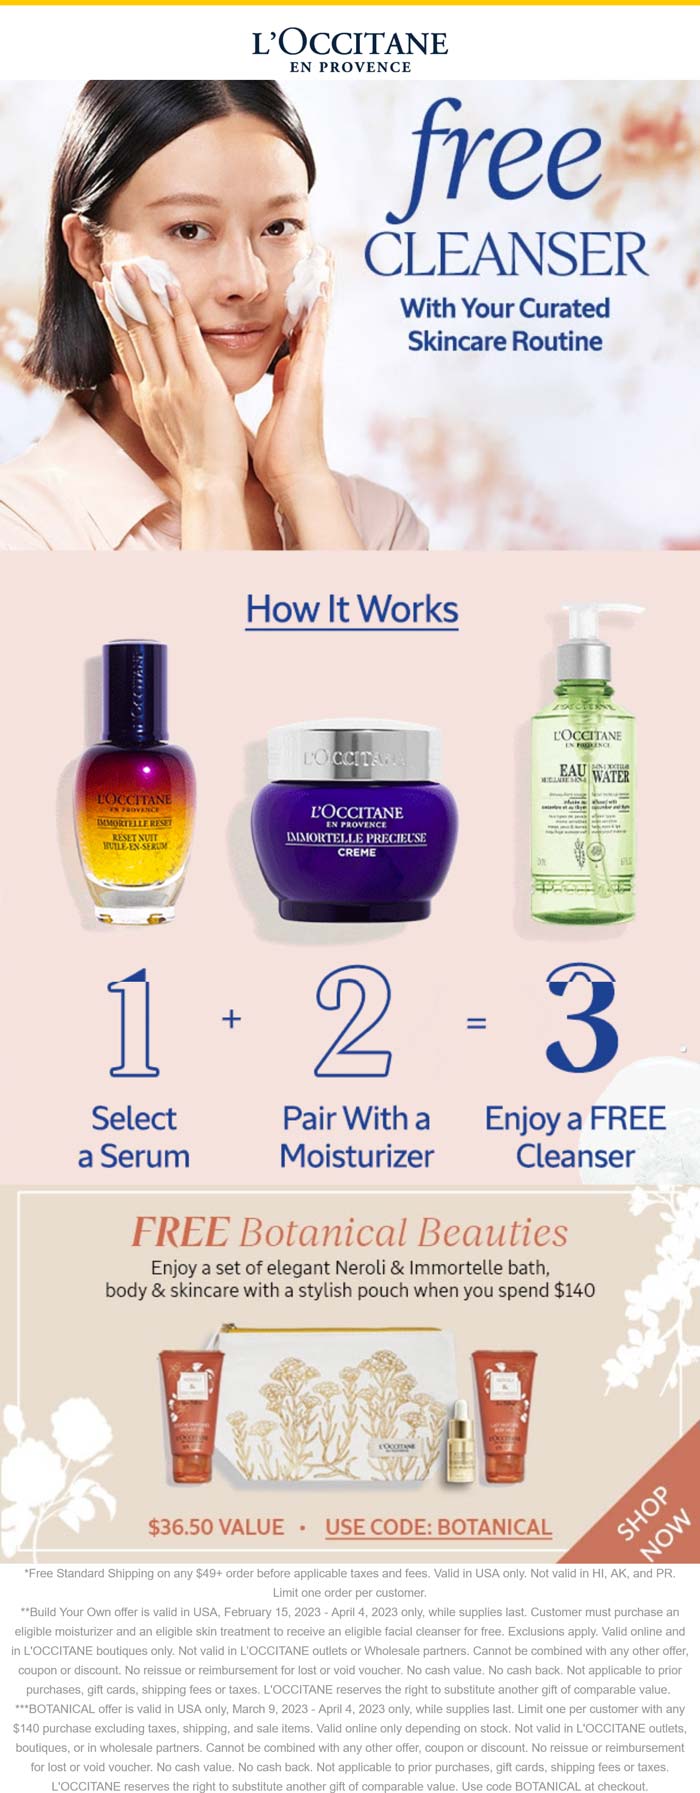 LOccitane stores Coupon  Free cleanser with your routine + free kit on $140 at LOccitane via promo code BOTANICAL #loccitane 